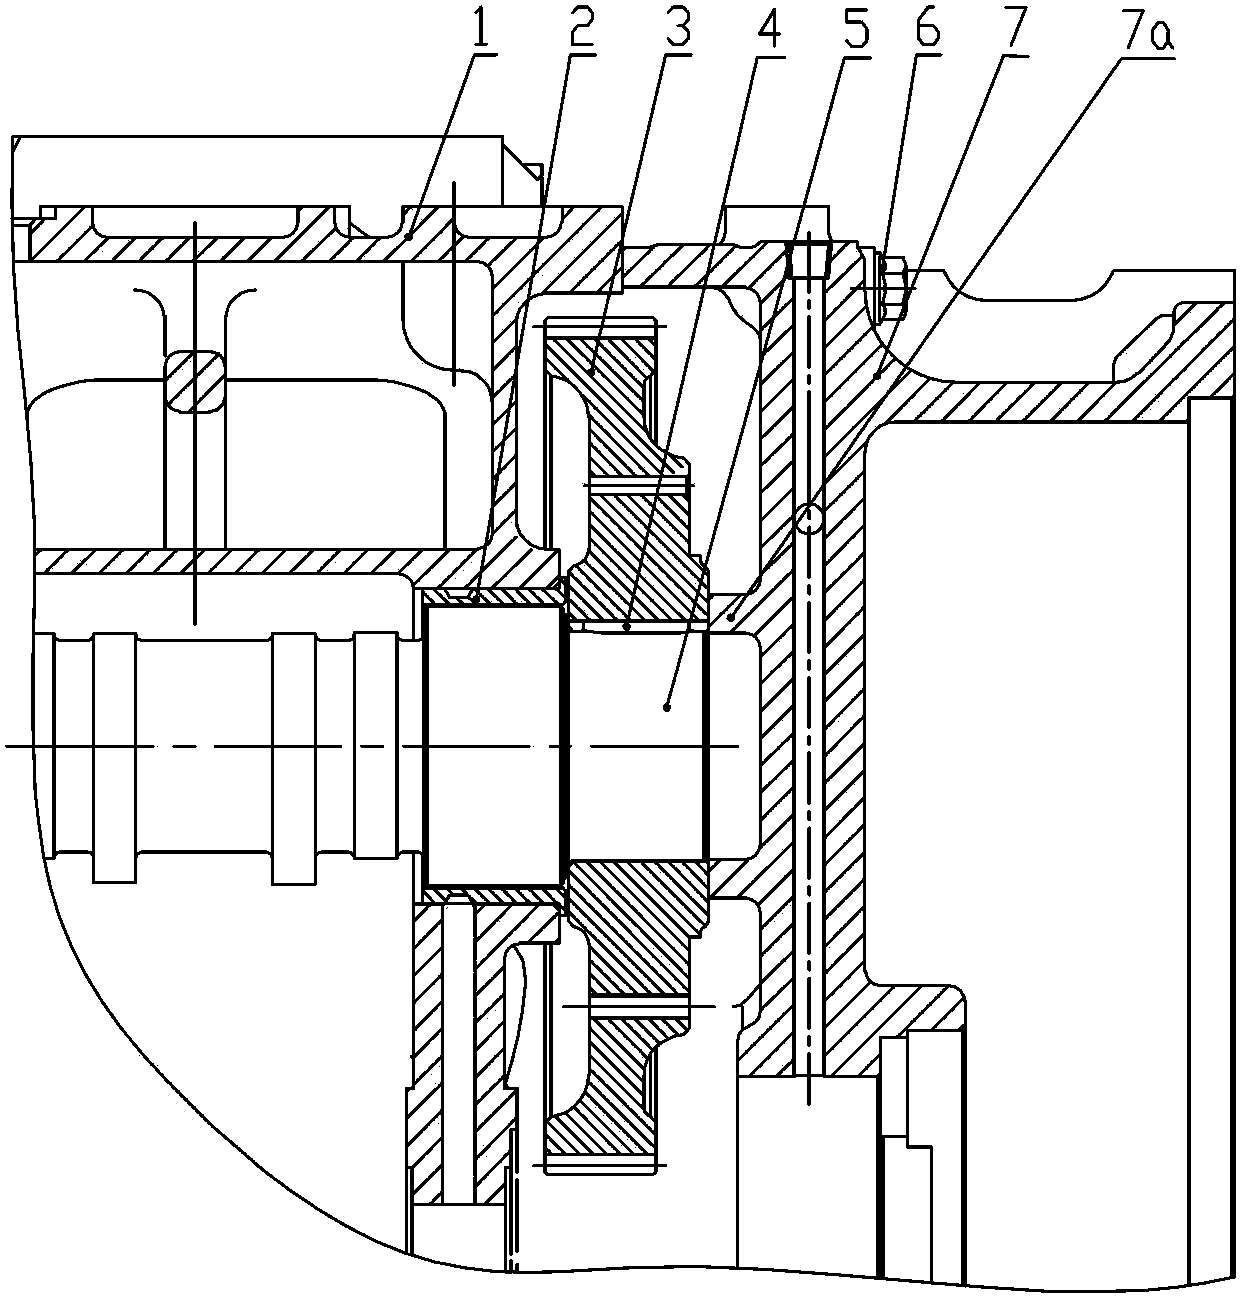 Axial positioning and connecting structure of cam shaft